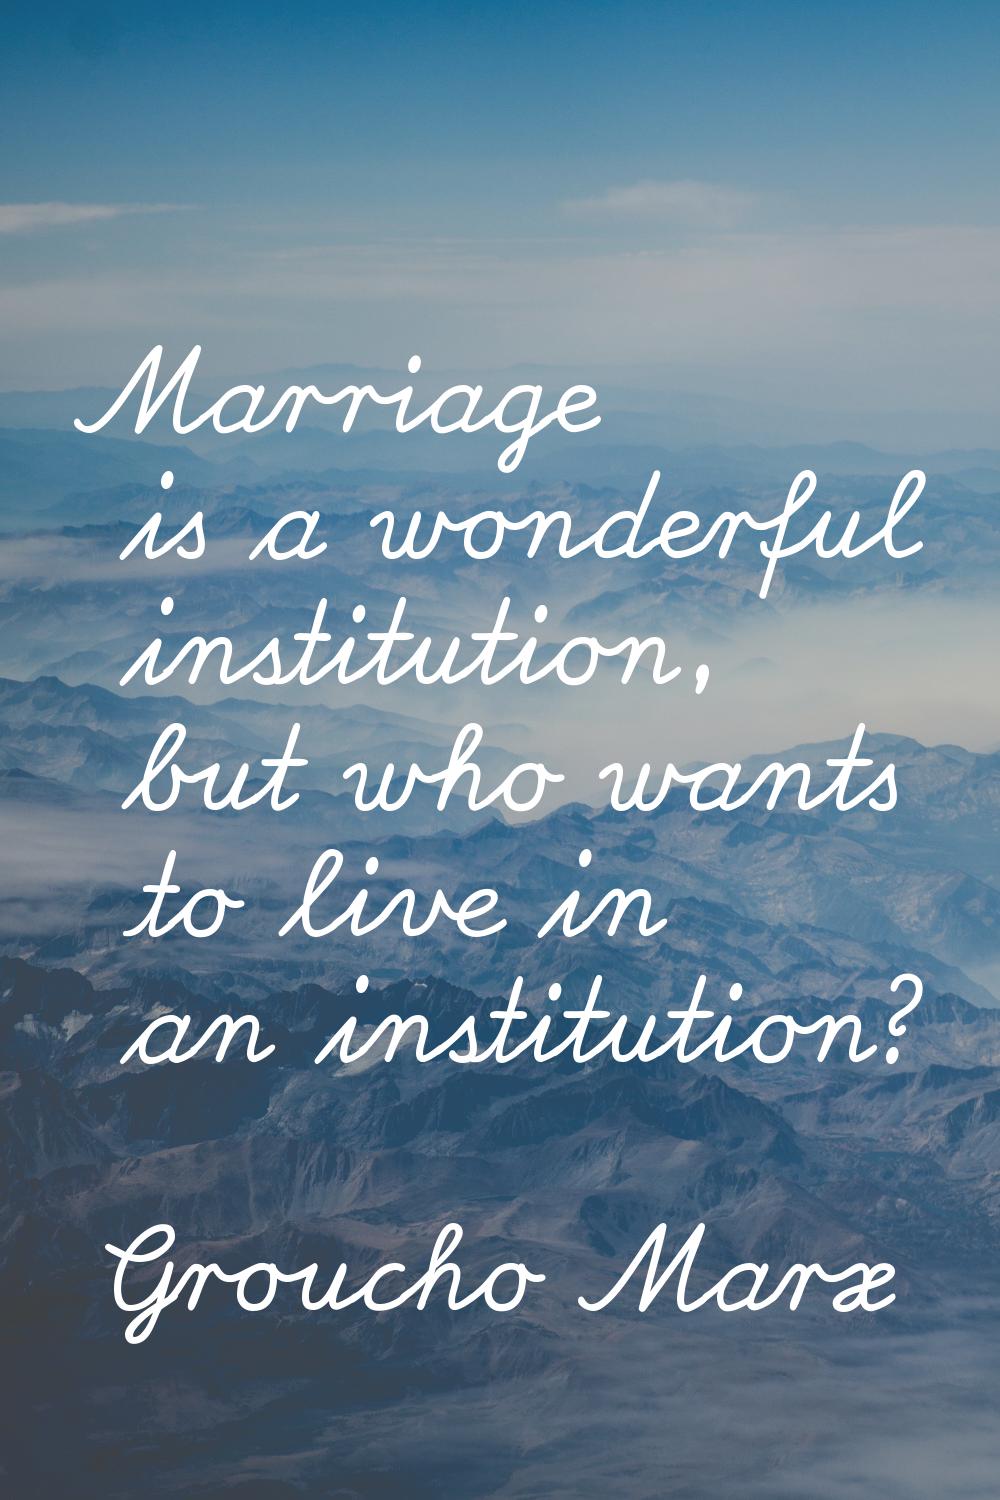 Marriage is a wonderful institution, but who wants to live in an institution?